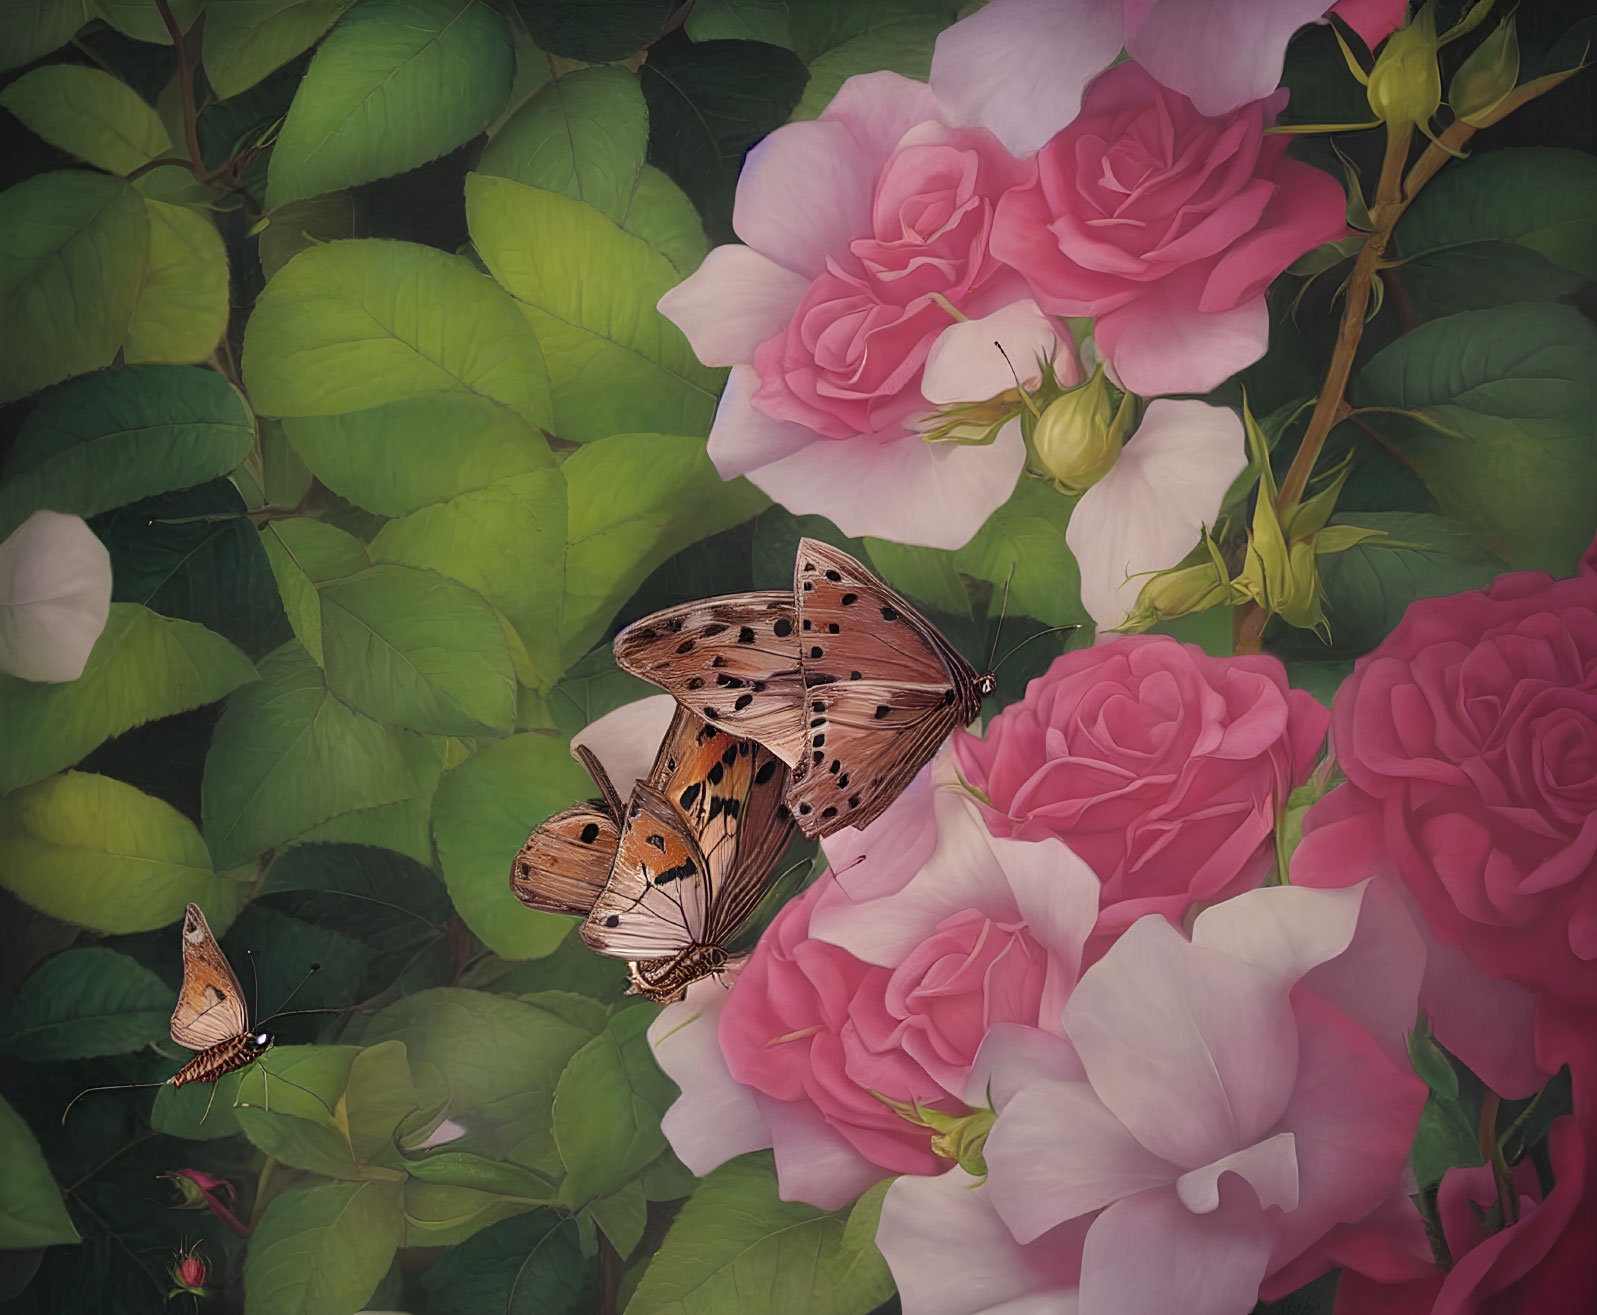 Pink roses, green leaves, and butterflies on dark background